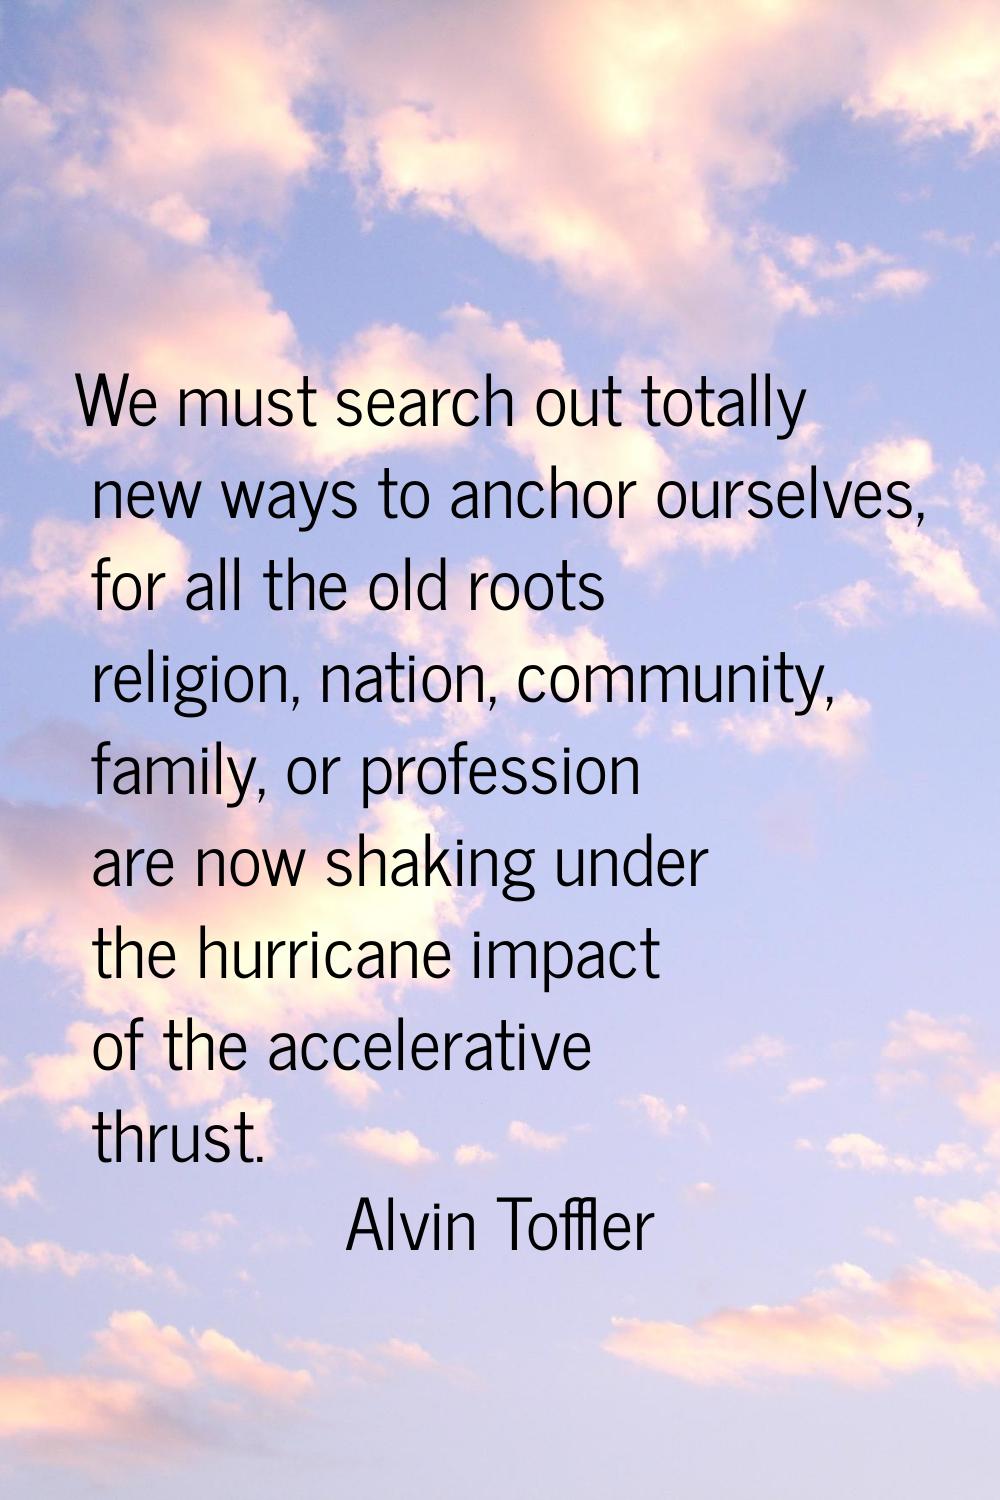 We must search out totally new ways to anchor ourselves, for all the old roots religion, nation, co